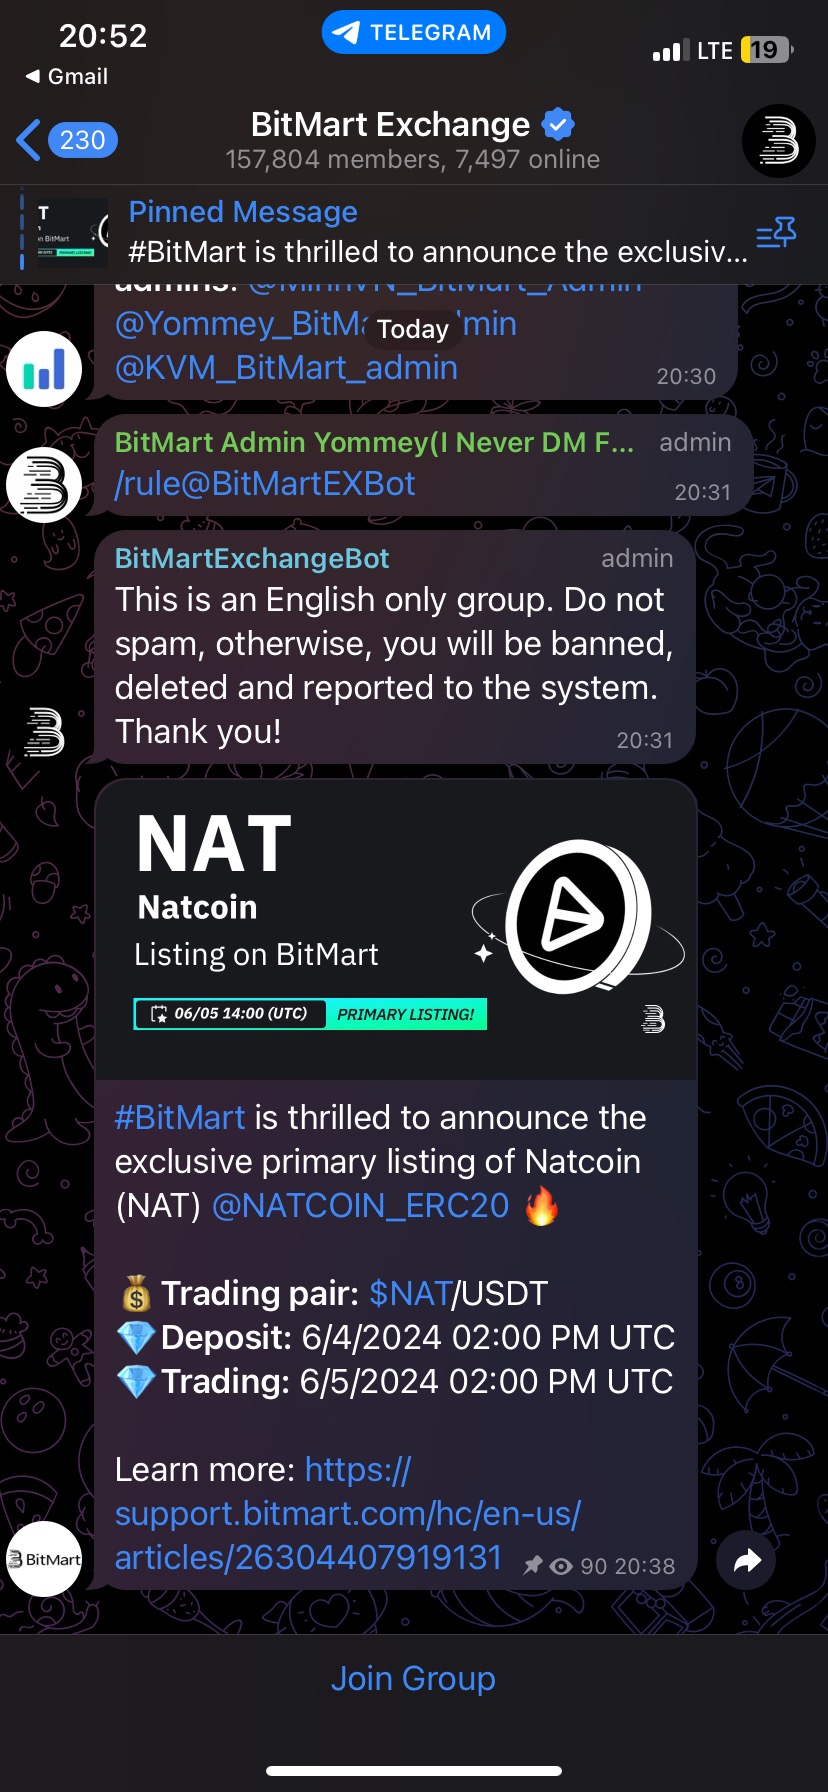 Exclusive primary listing of Natcoin